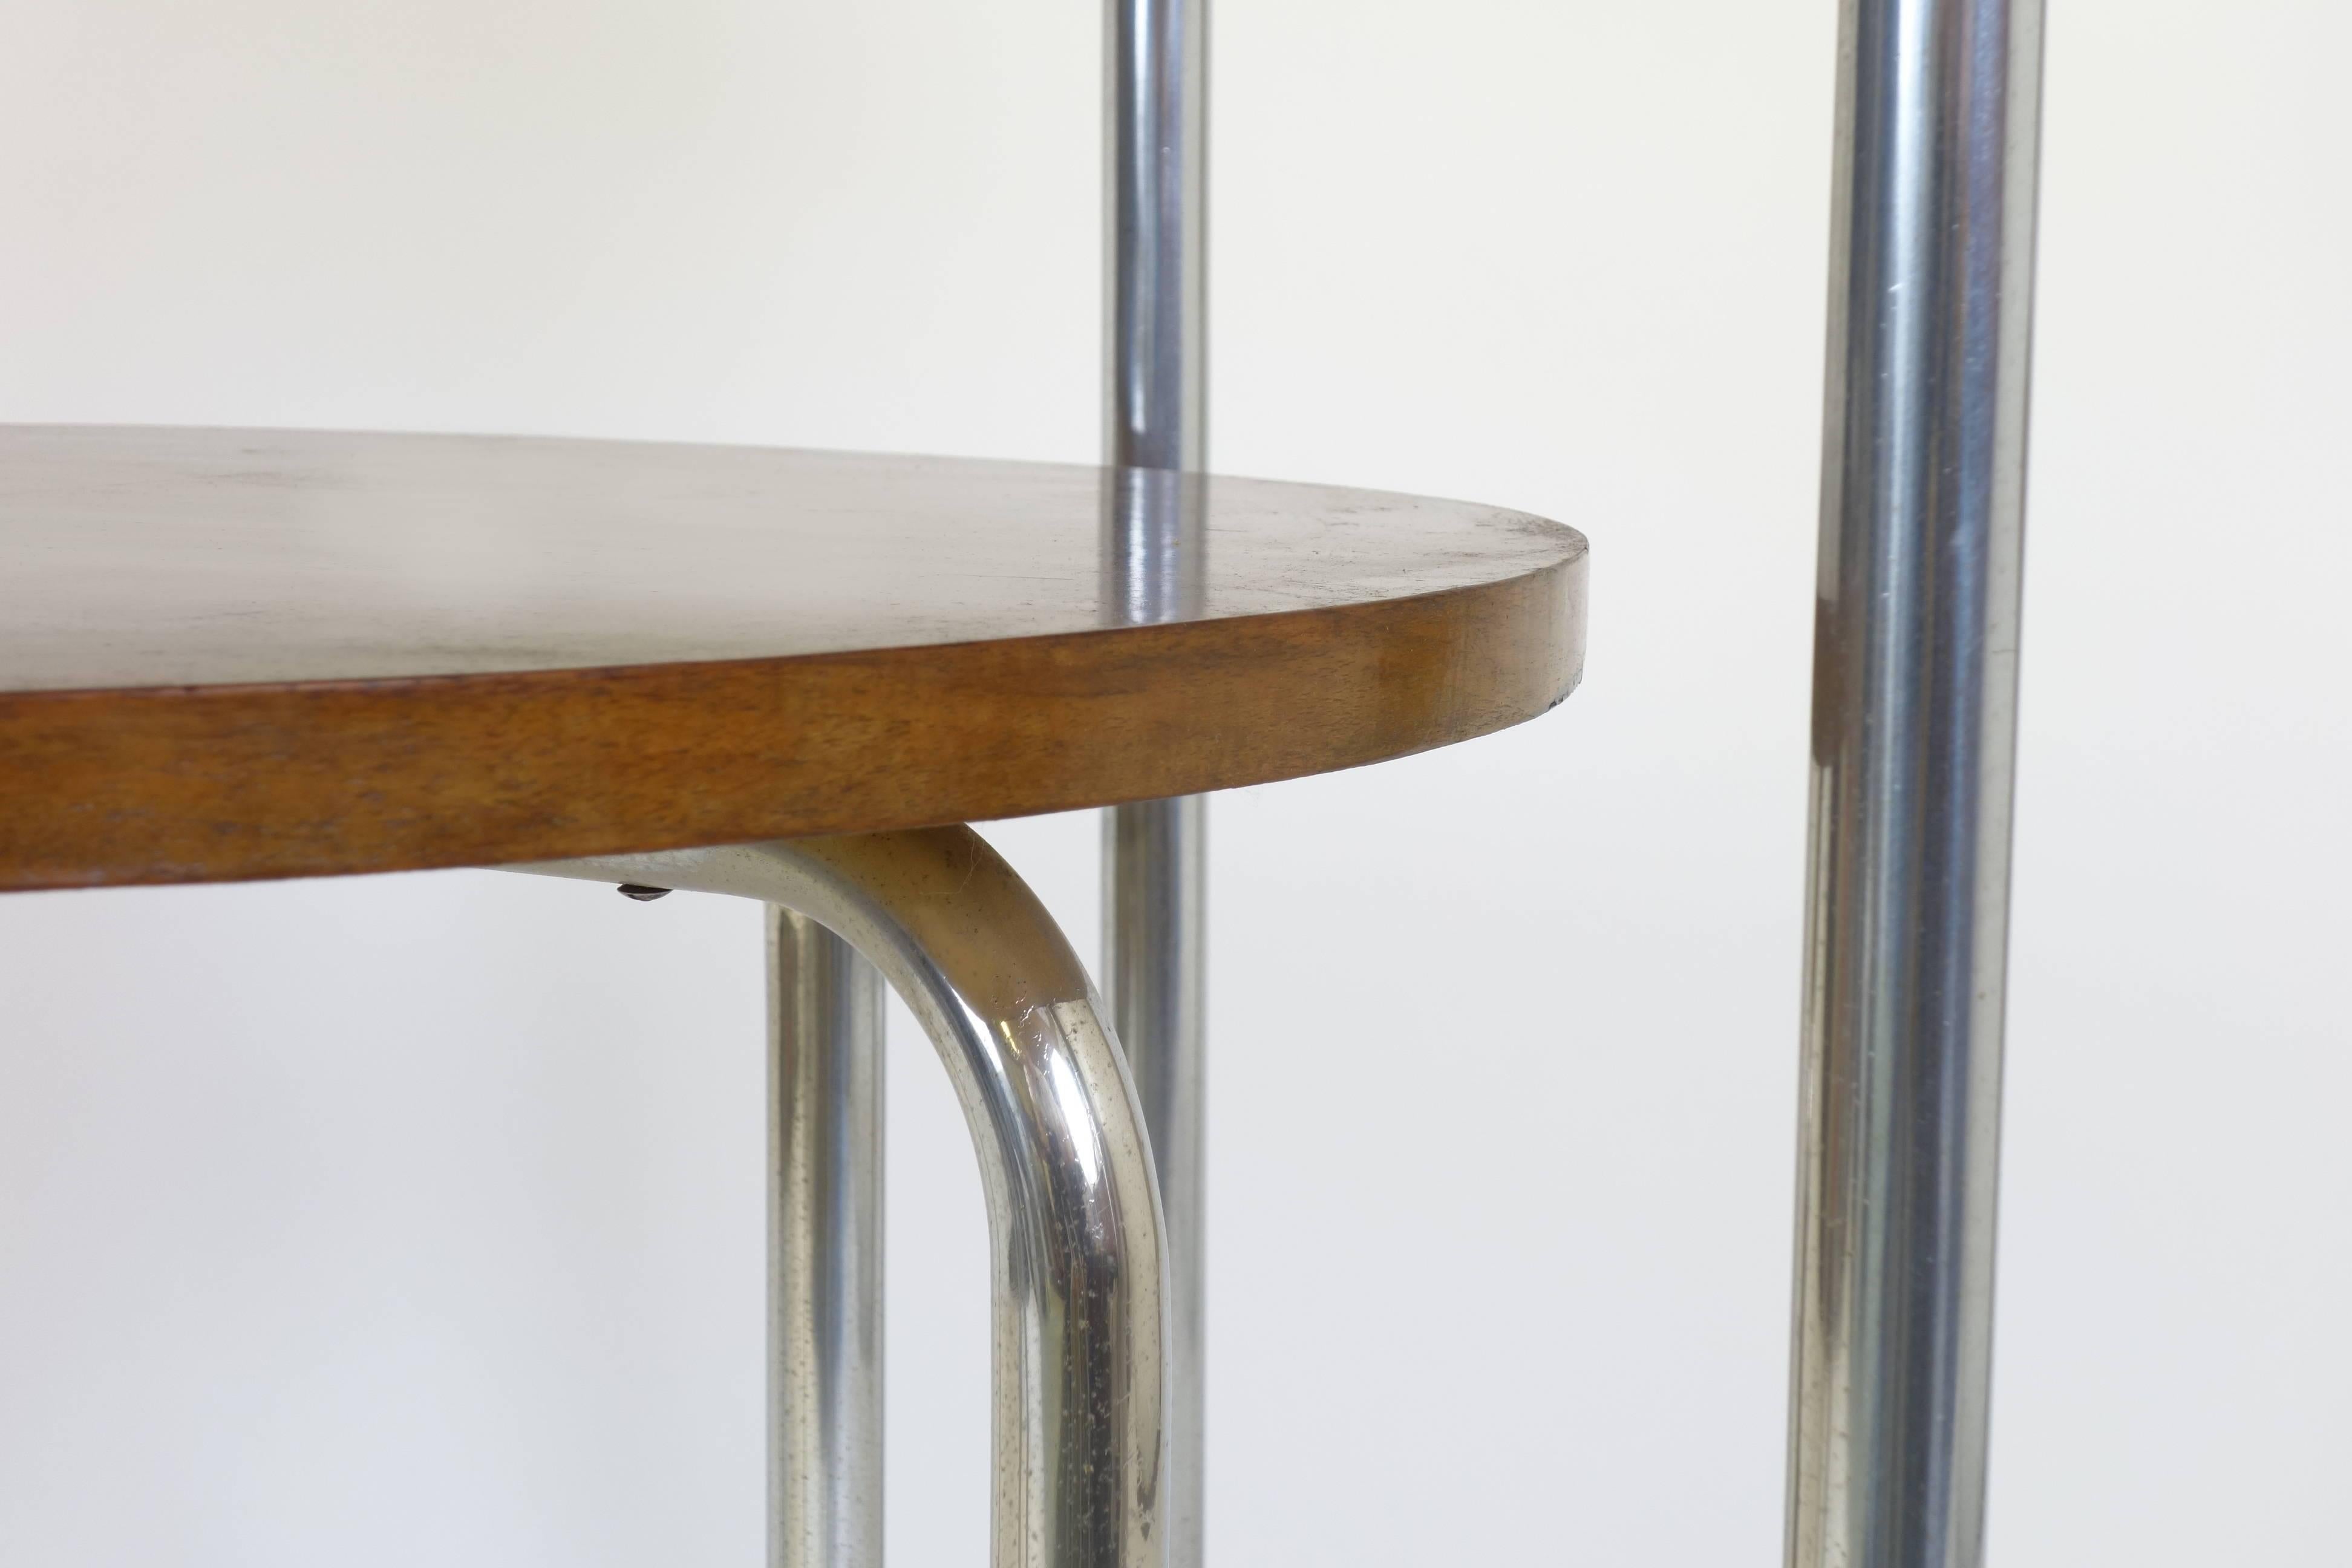 Eccentrically formed loop side table in the style of Bauhaus, Mauser, Breuer. Continuous steel frame accentuating its characteristic severe, though handsome shape. Two circular wood tops of beech wood are surmounting its classical and functional